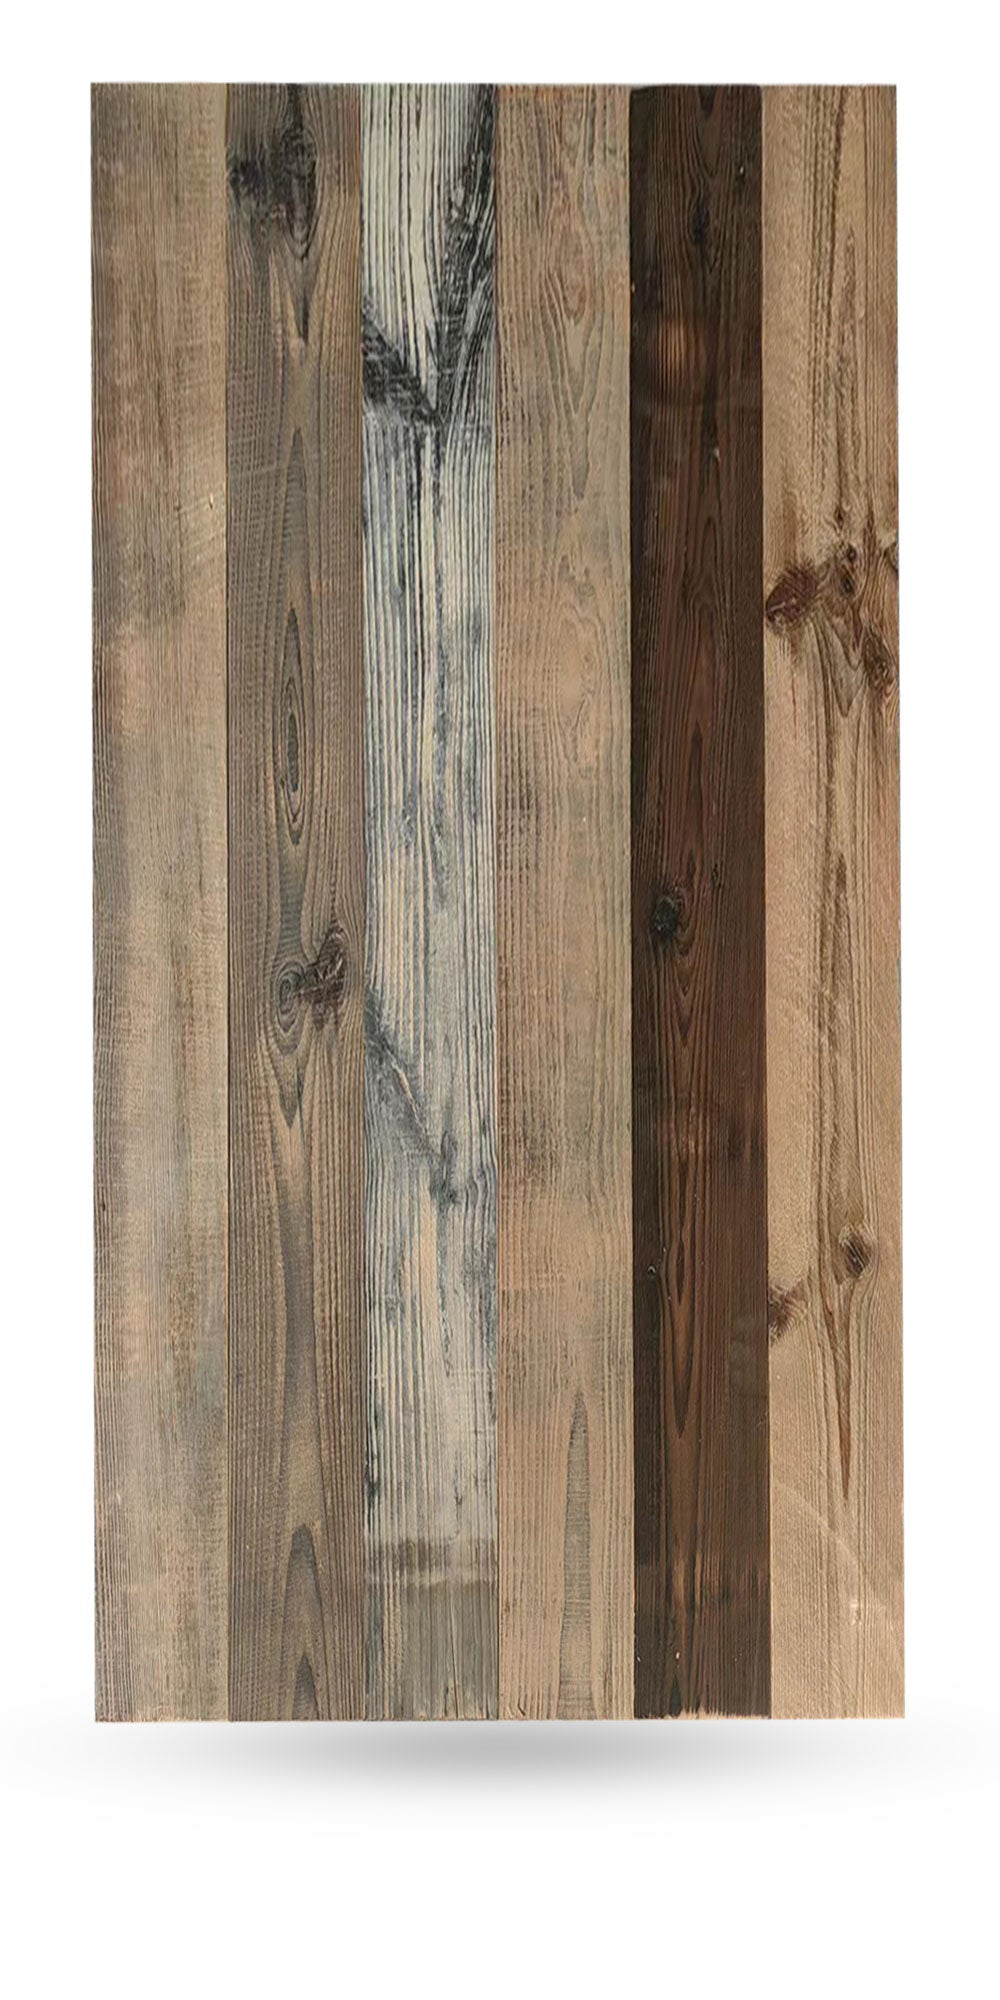 Reclaimed Wood Paneling, Reclaimed Barn Wood Planks for Walls